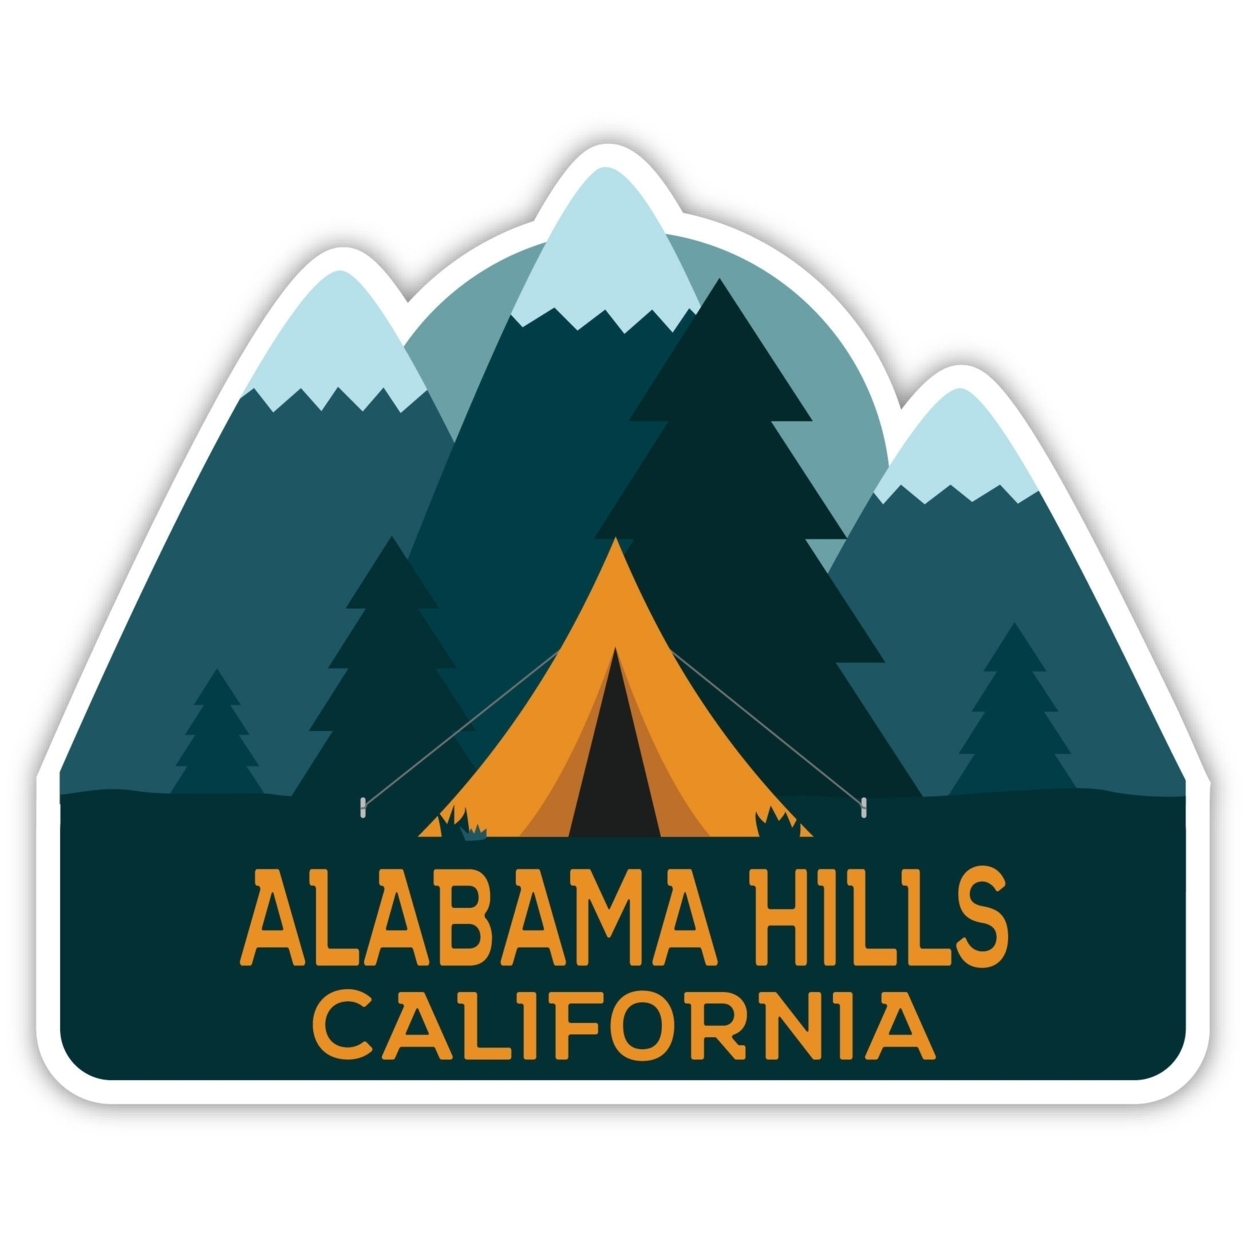 Alabama Hills California Souvenir Decorative Stickers (Choose Theme And Size) - 4-Pack, 4-Inch, Tent